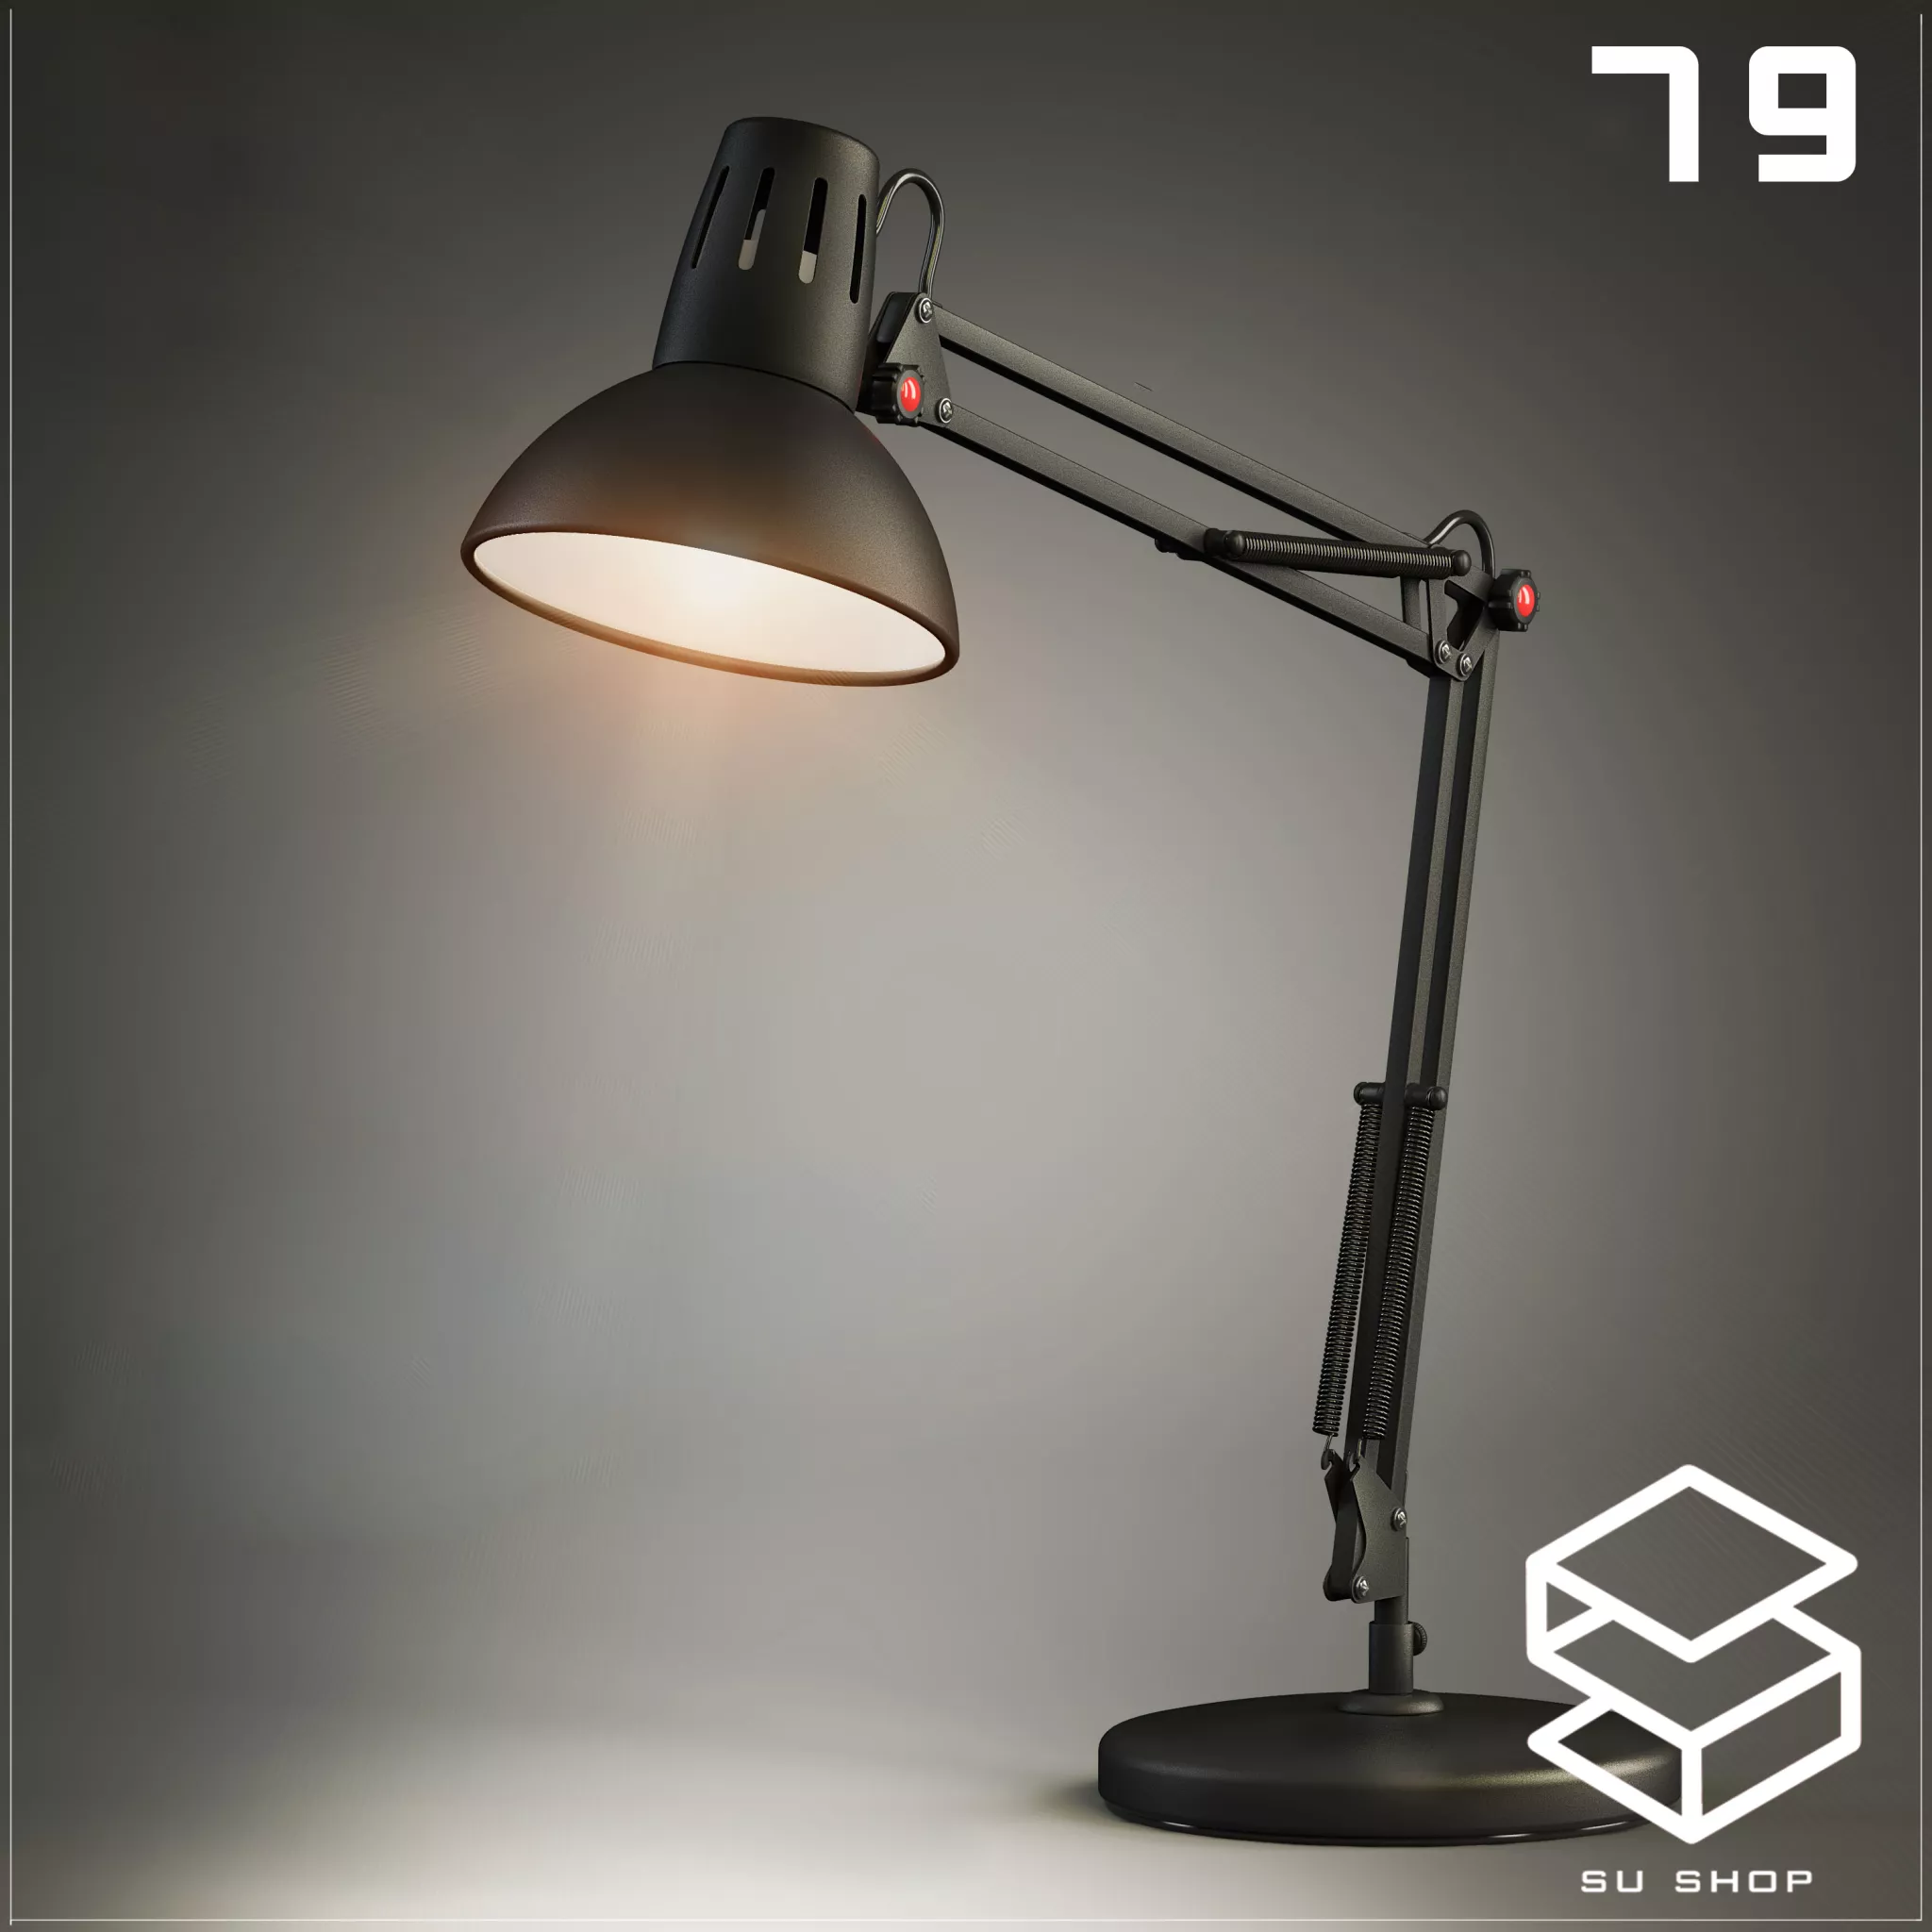 MODERN TABLE LAMP - SKETCHUP 3D MODEL - VRAY OR ENSCAPE - ID14876